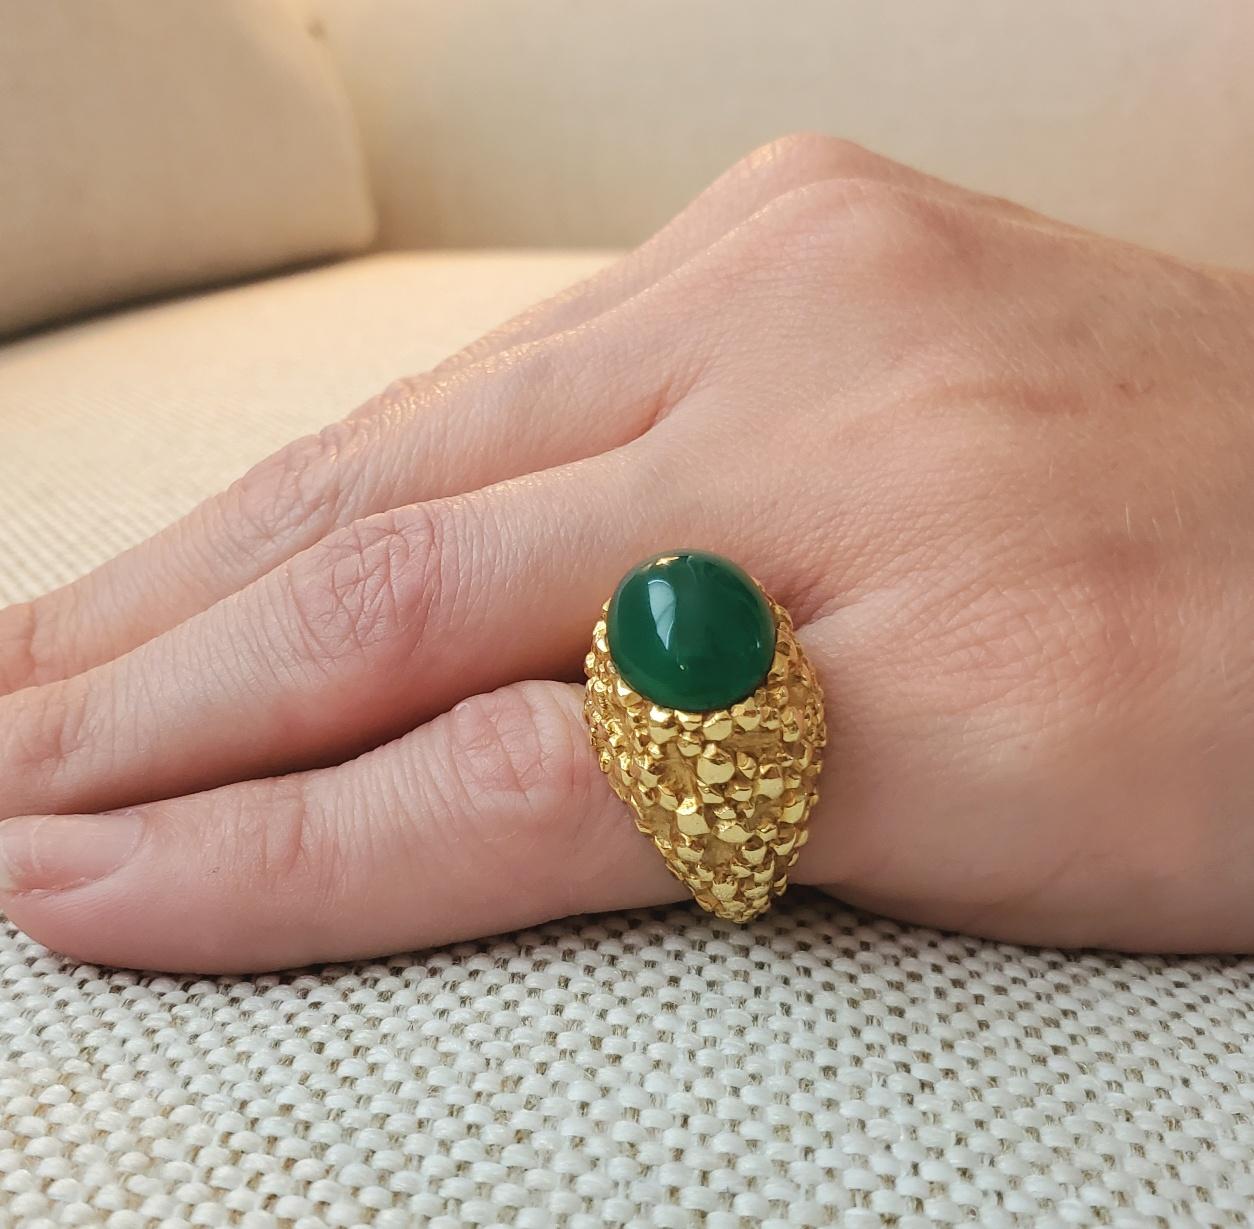 Van Cleef & Arpels 1970 Paris Cocktail Ring 18kt Gold with 8.27 Cts Chrysoprase 3